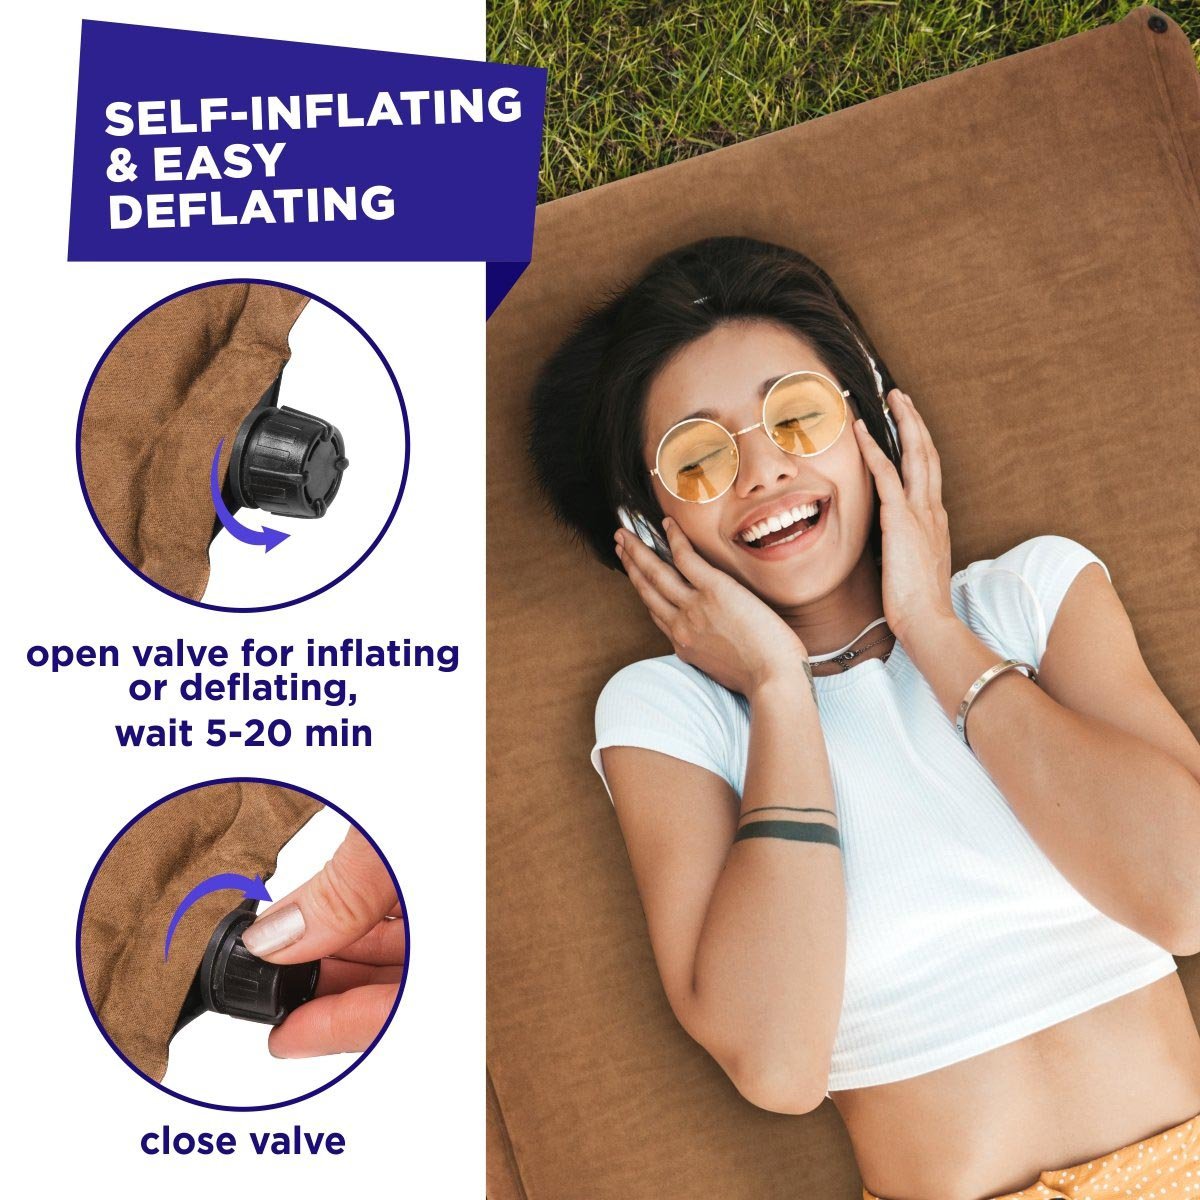 Beige Self Inflating Sleeping Pad is very easy to setup - just open the valve, wait until the matress inflates, and close the valve